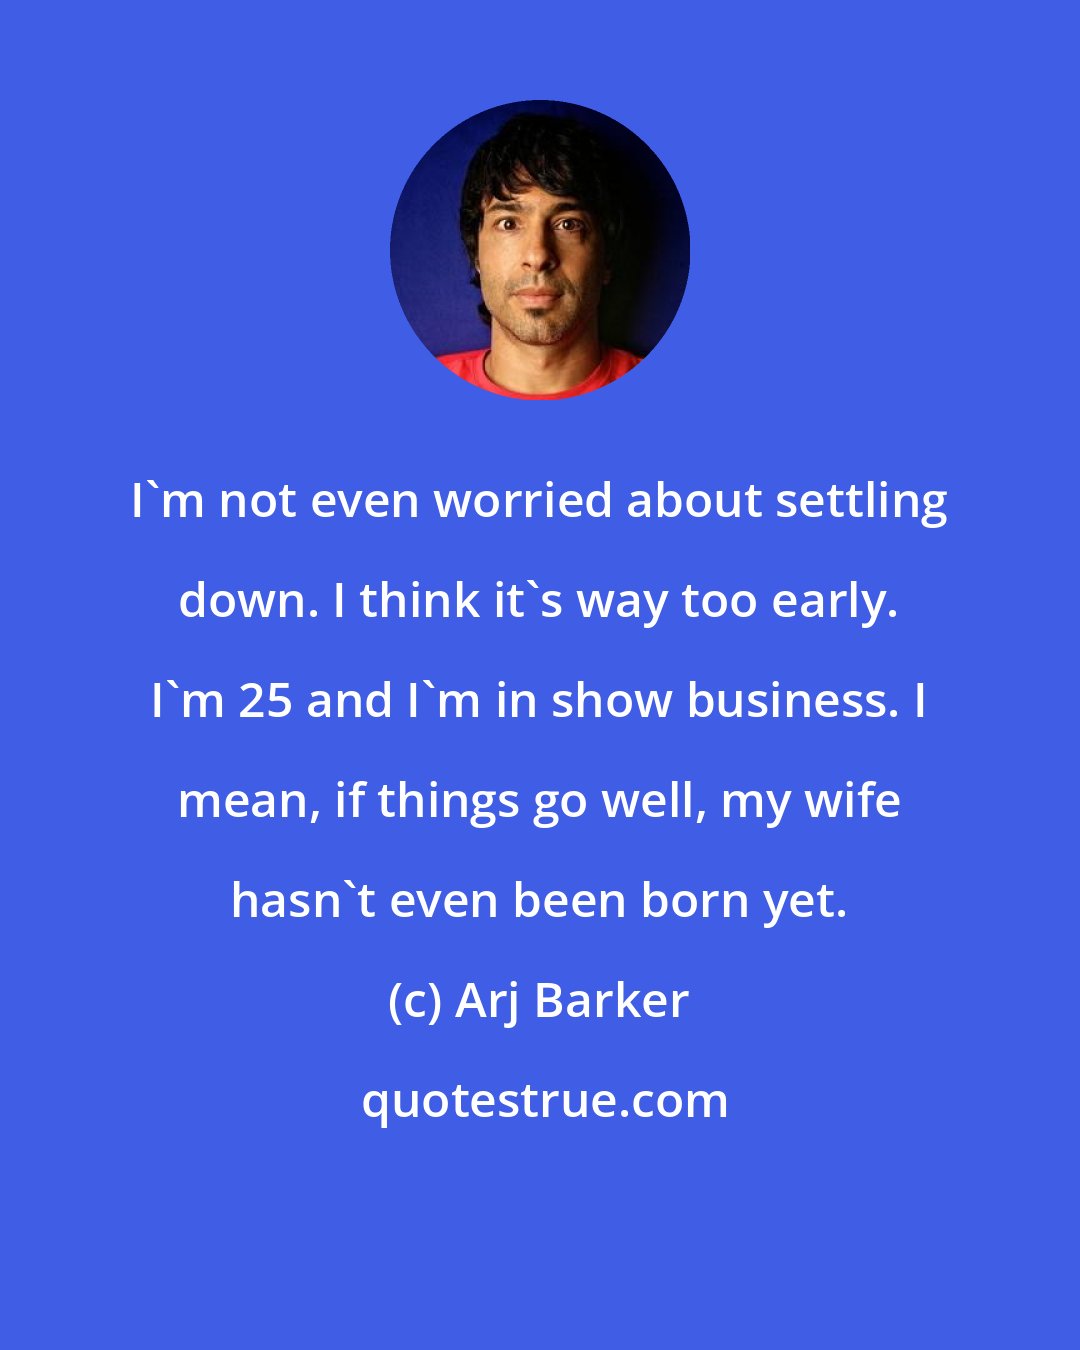 Arj Barker: I'm not even worried about settling down. I think it's way too early. I'm 25 and I'm in show business. I mean, if things go well, my wife hasn't even been born yet.